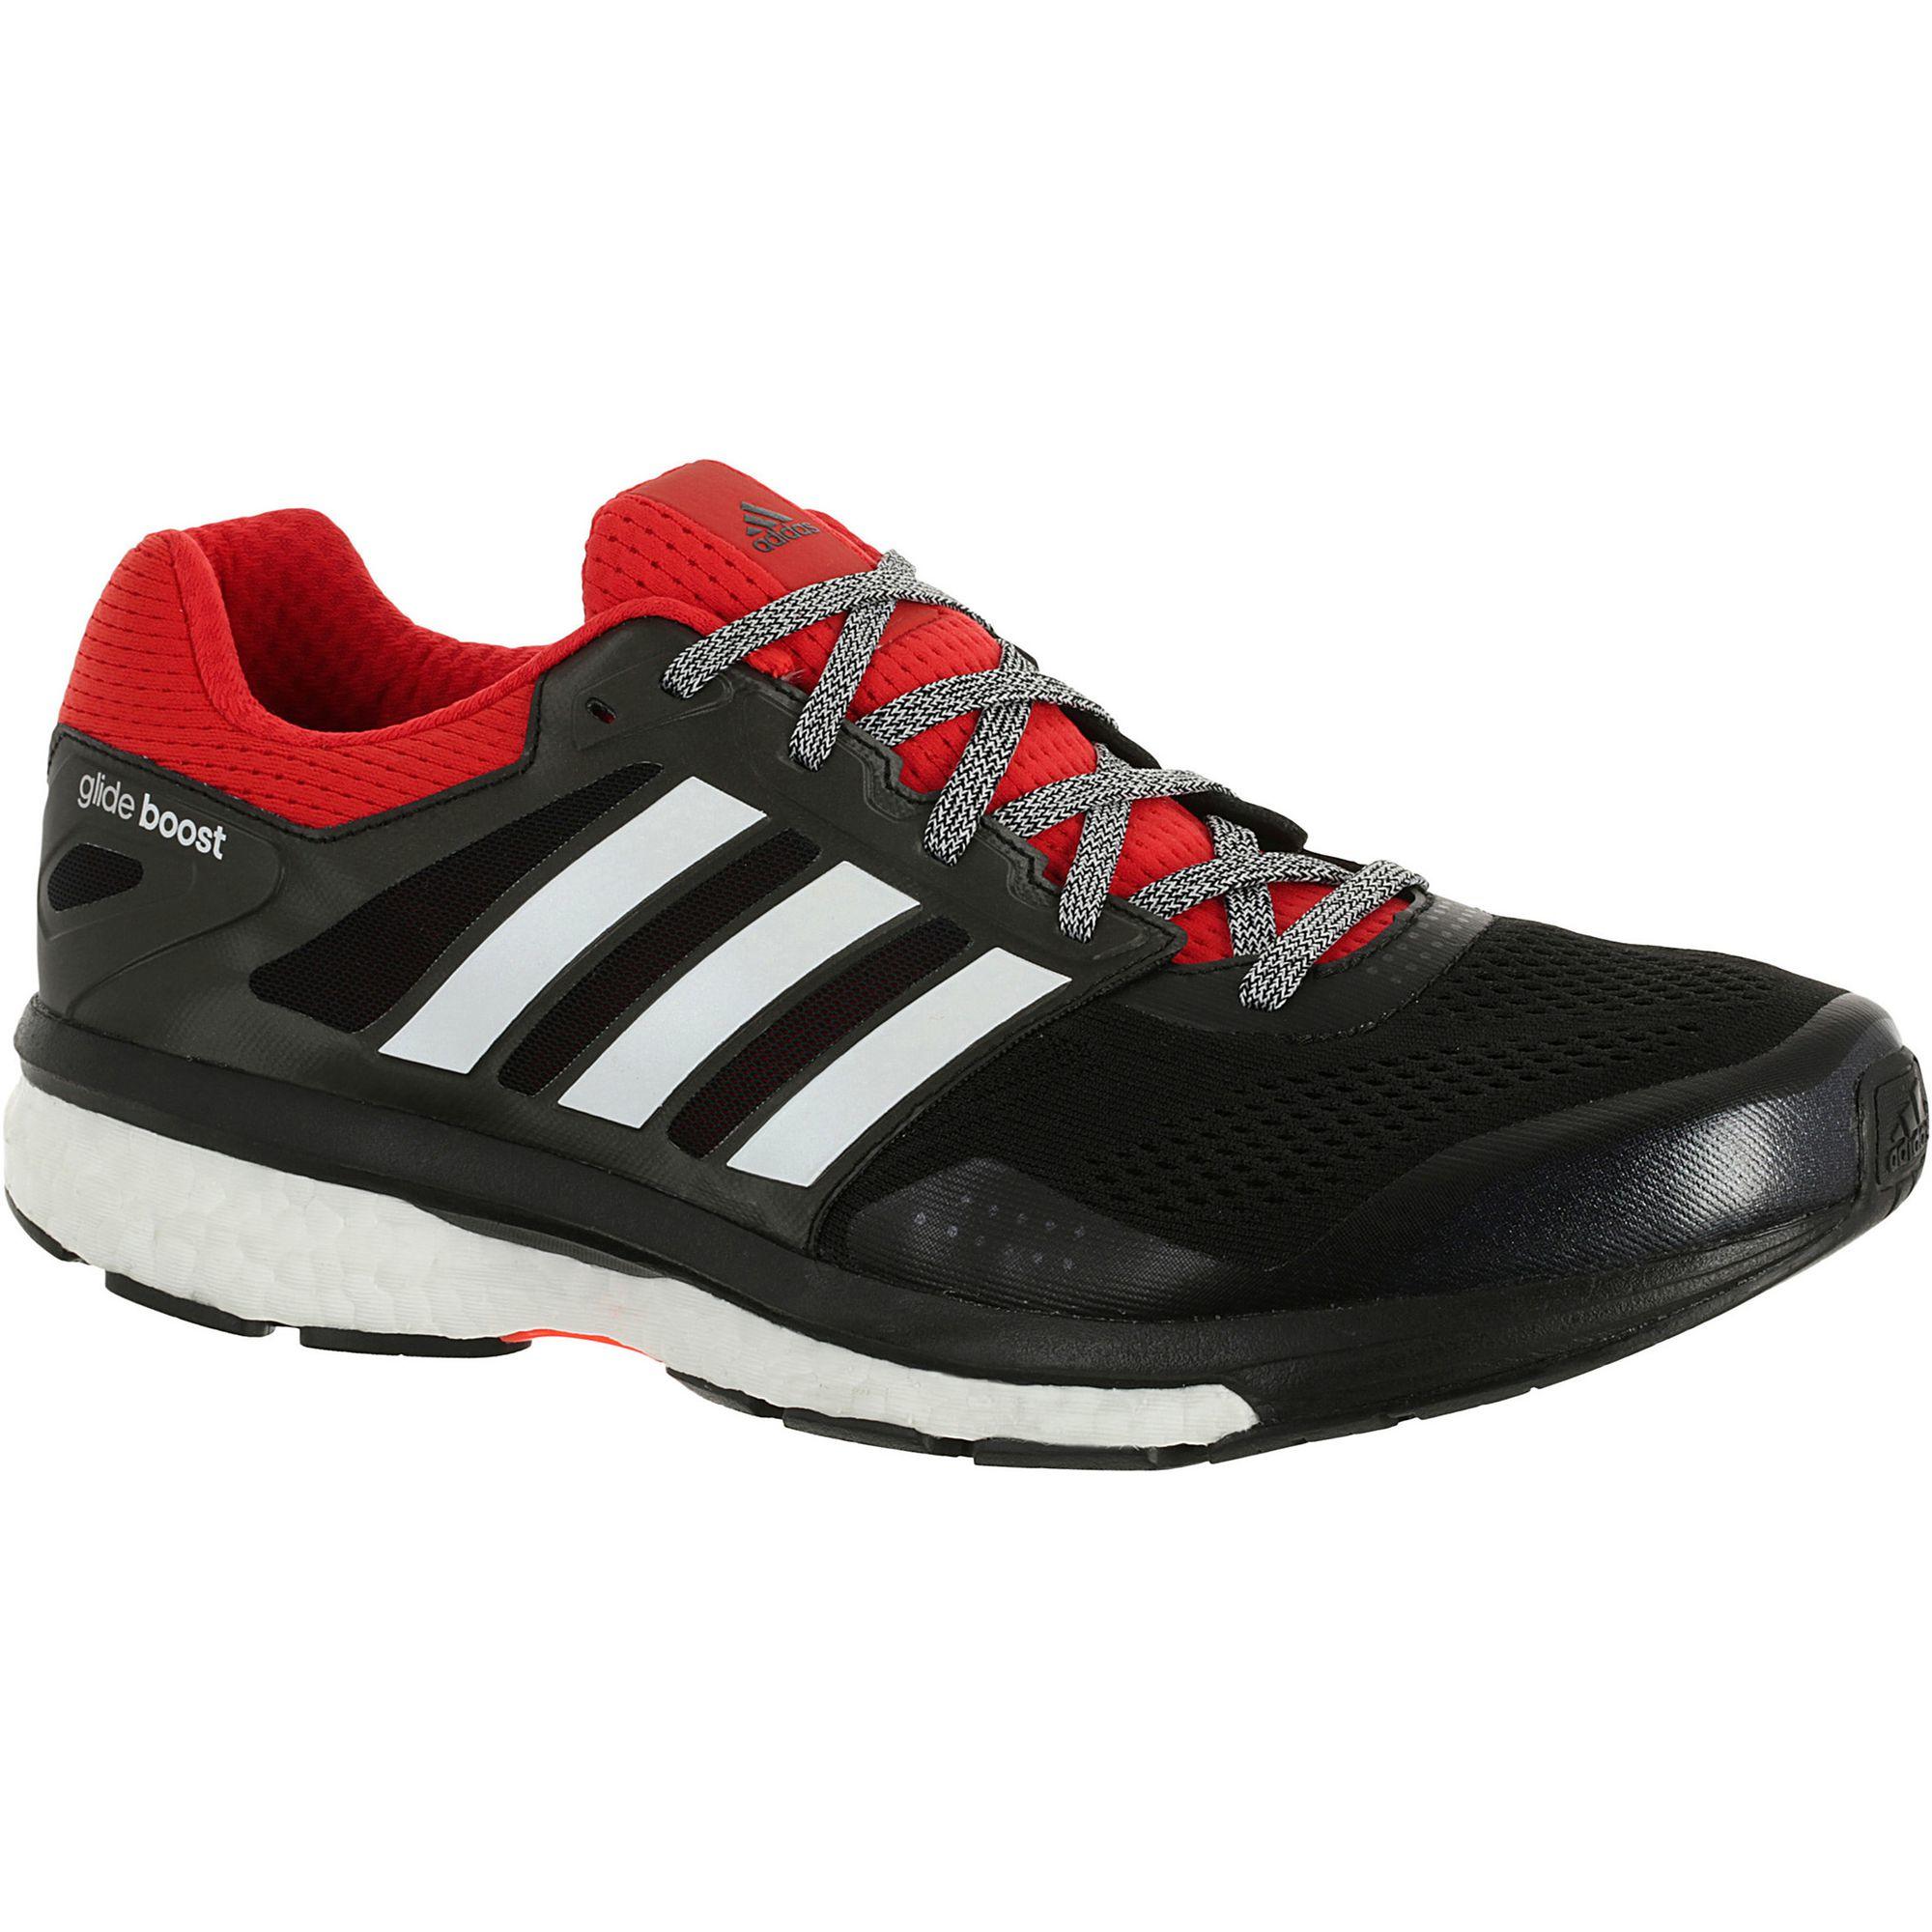 ADIDAS Men's performance short to mid-distance road running shoe.